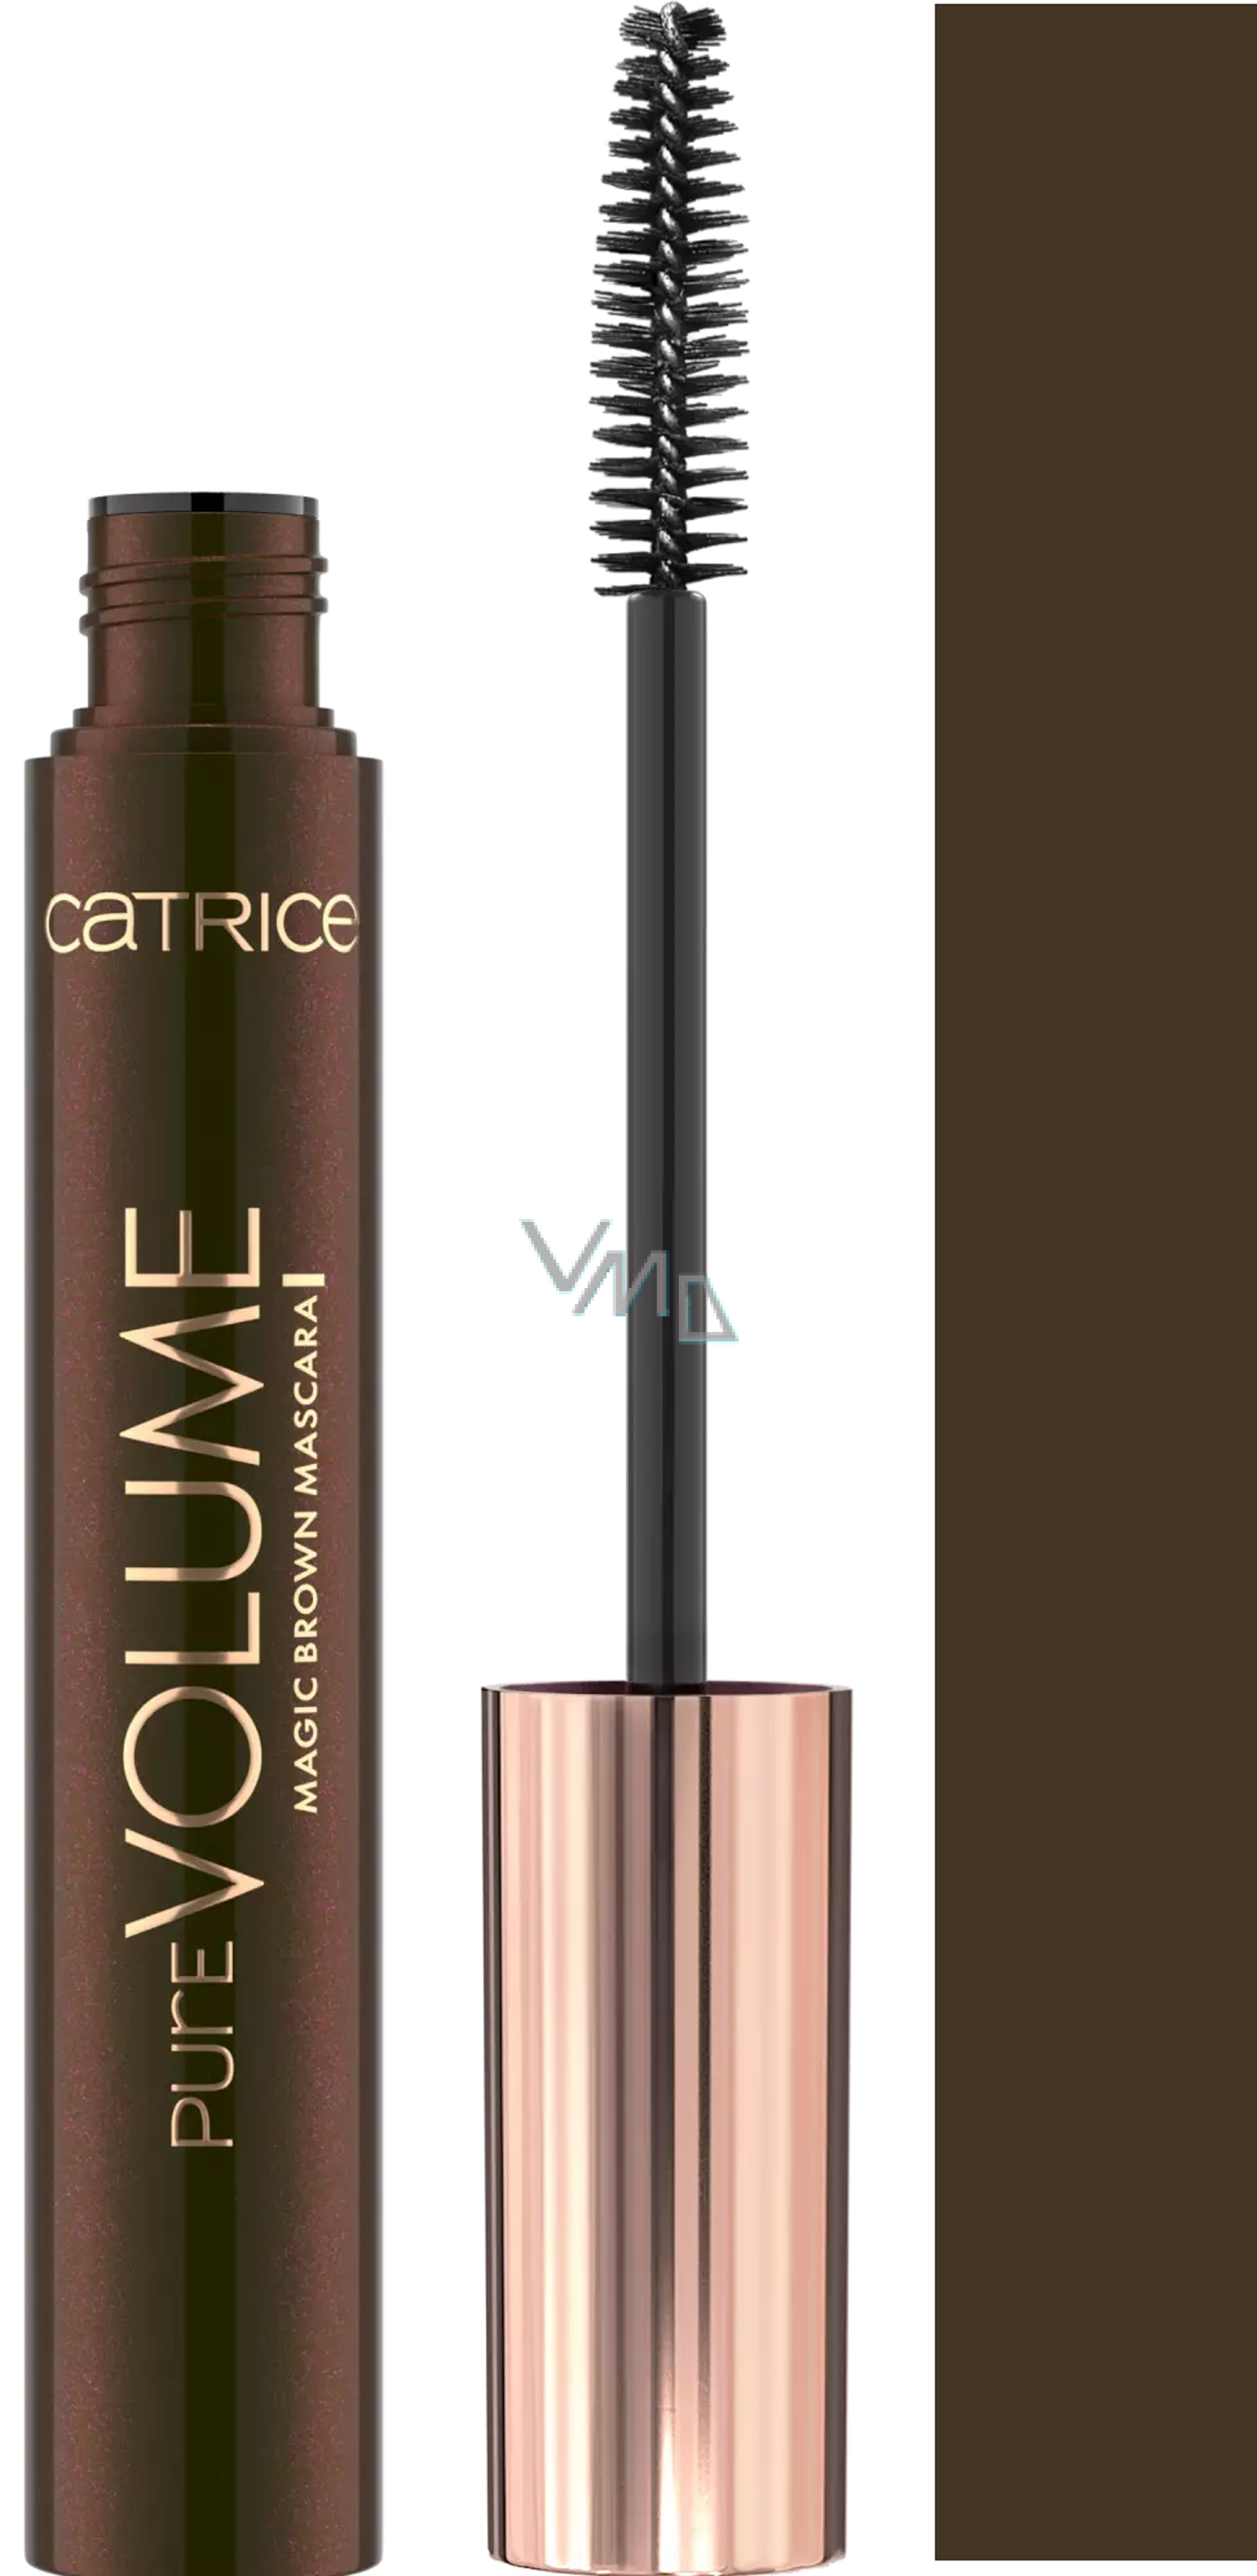 - for Mascara 10 - Magic long Brown drogerie volume and VMD lashes 010 ml Burgundy Volume Pure parfumerie Catrice